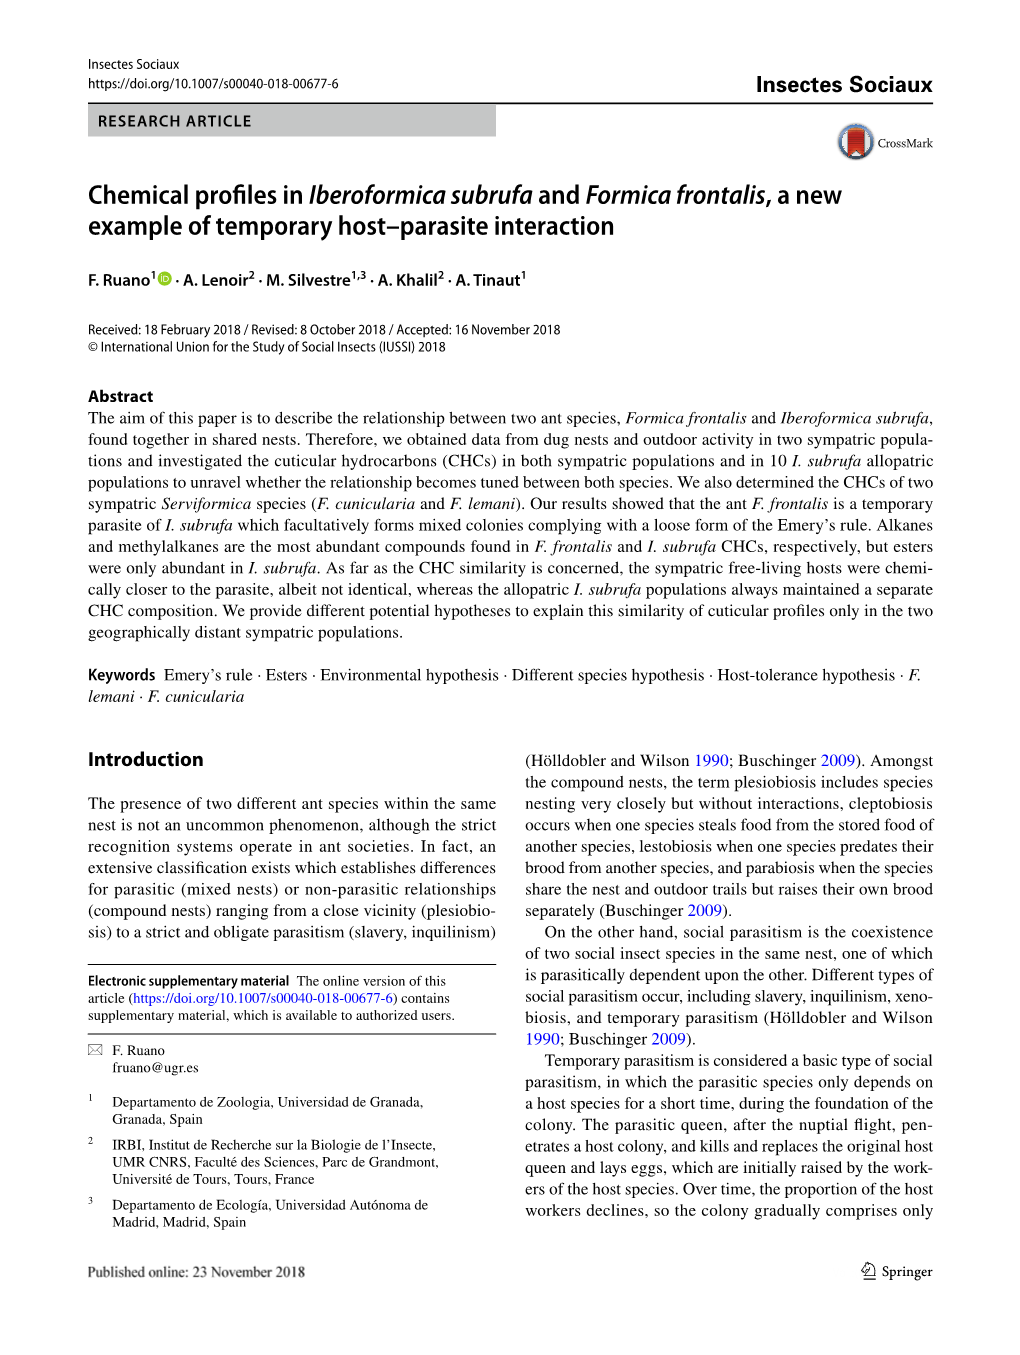 Chemical Profiles in Iberoformica Subrufa and Formica Frontalis, a New Example of Temporary Host–Parasite Interaction